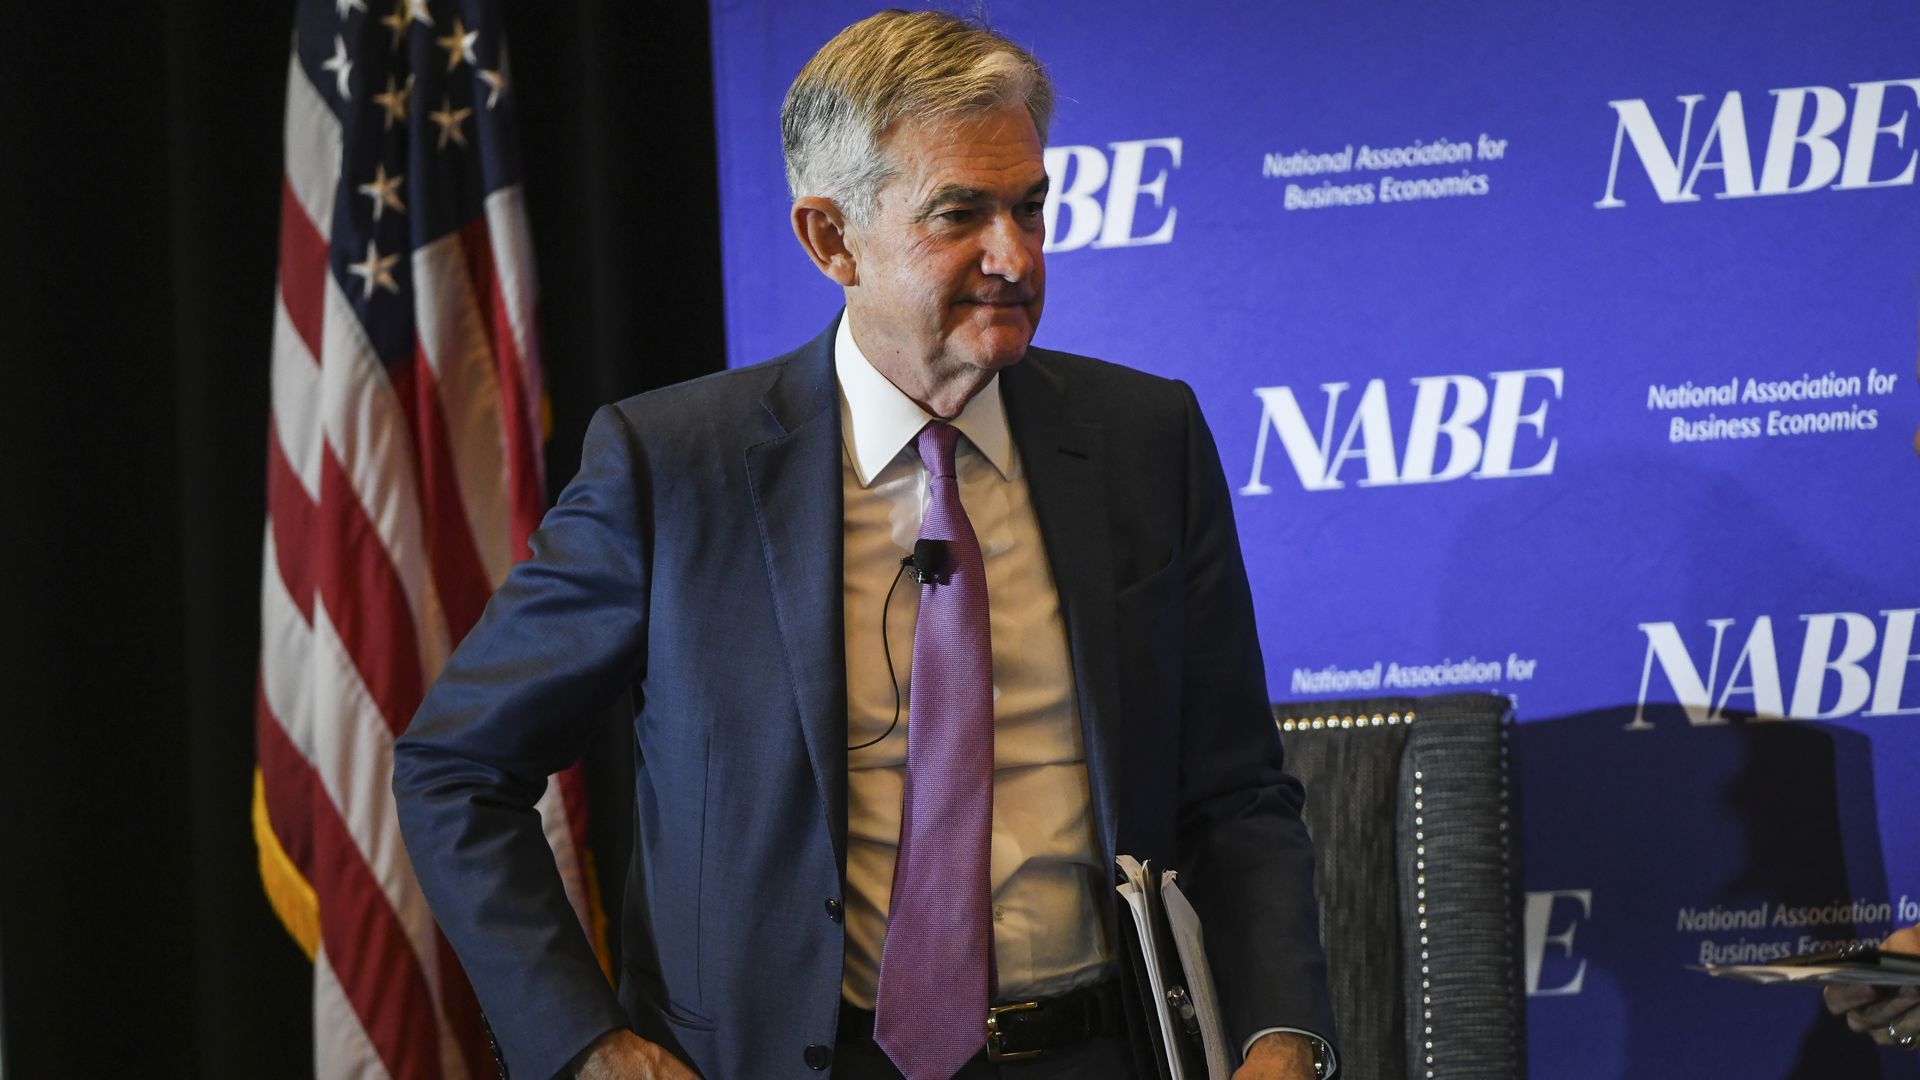 Powell at the 2019 National Association for Business Economics conference. Photo by  Daniel Brenner/Bloomberg via Getty Images